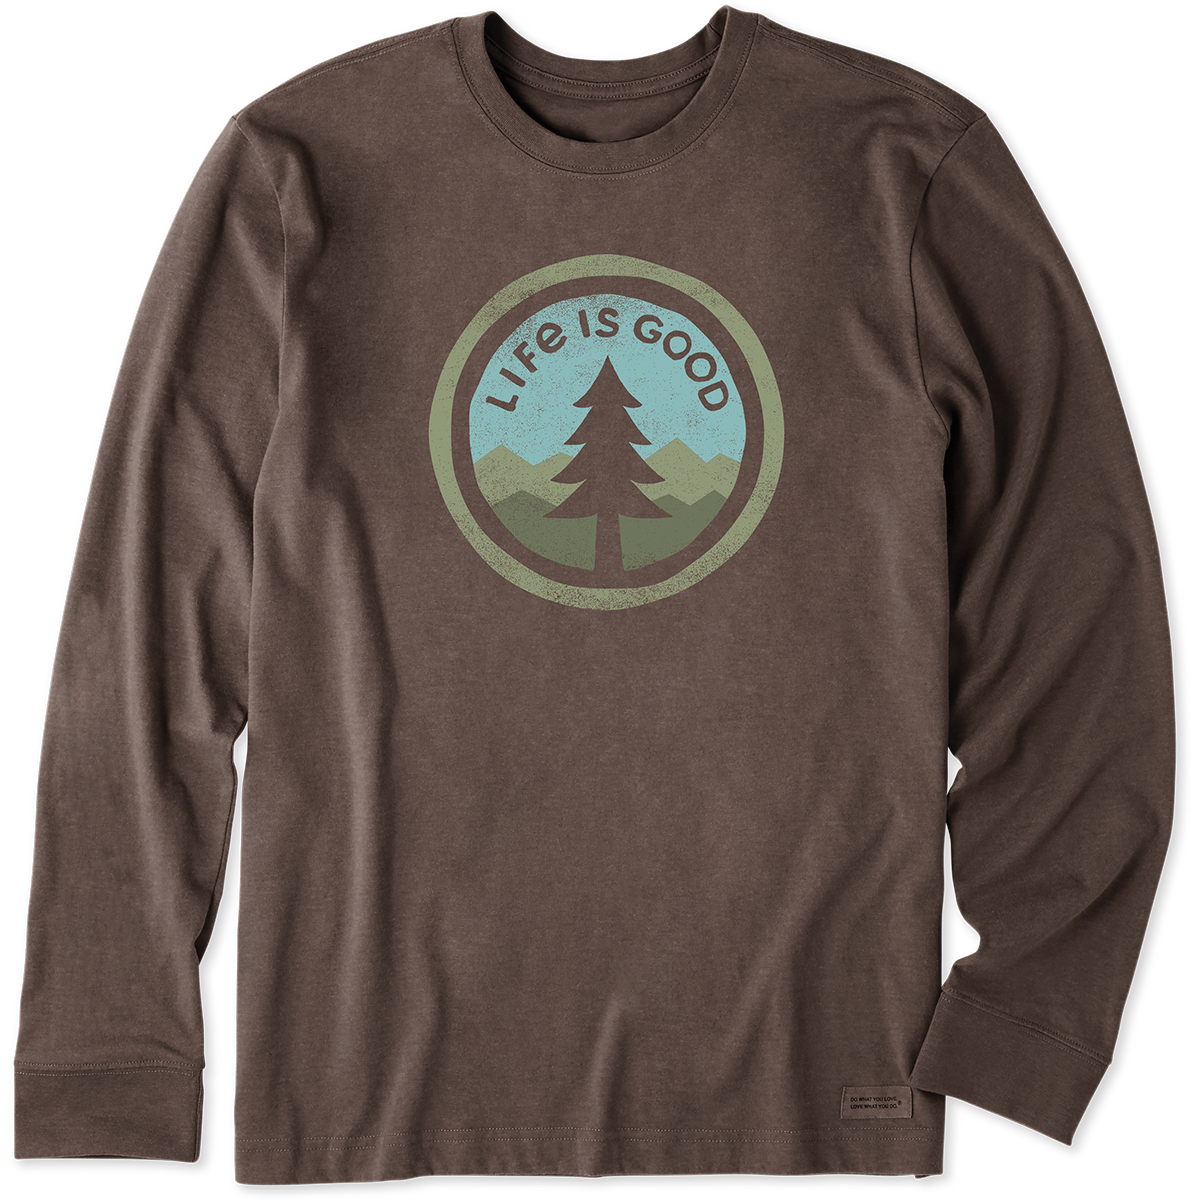 Life Is Good Men's Long-Sleeve Tree Coin Crusher Tee - Brown, M